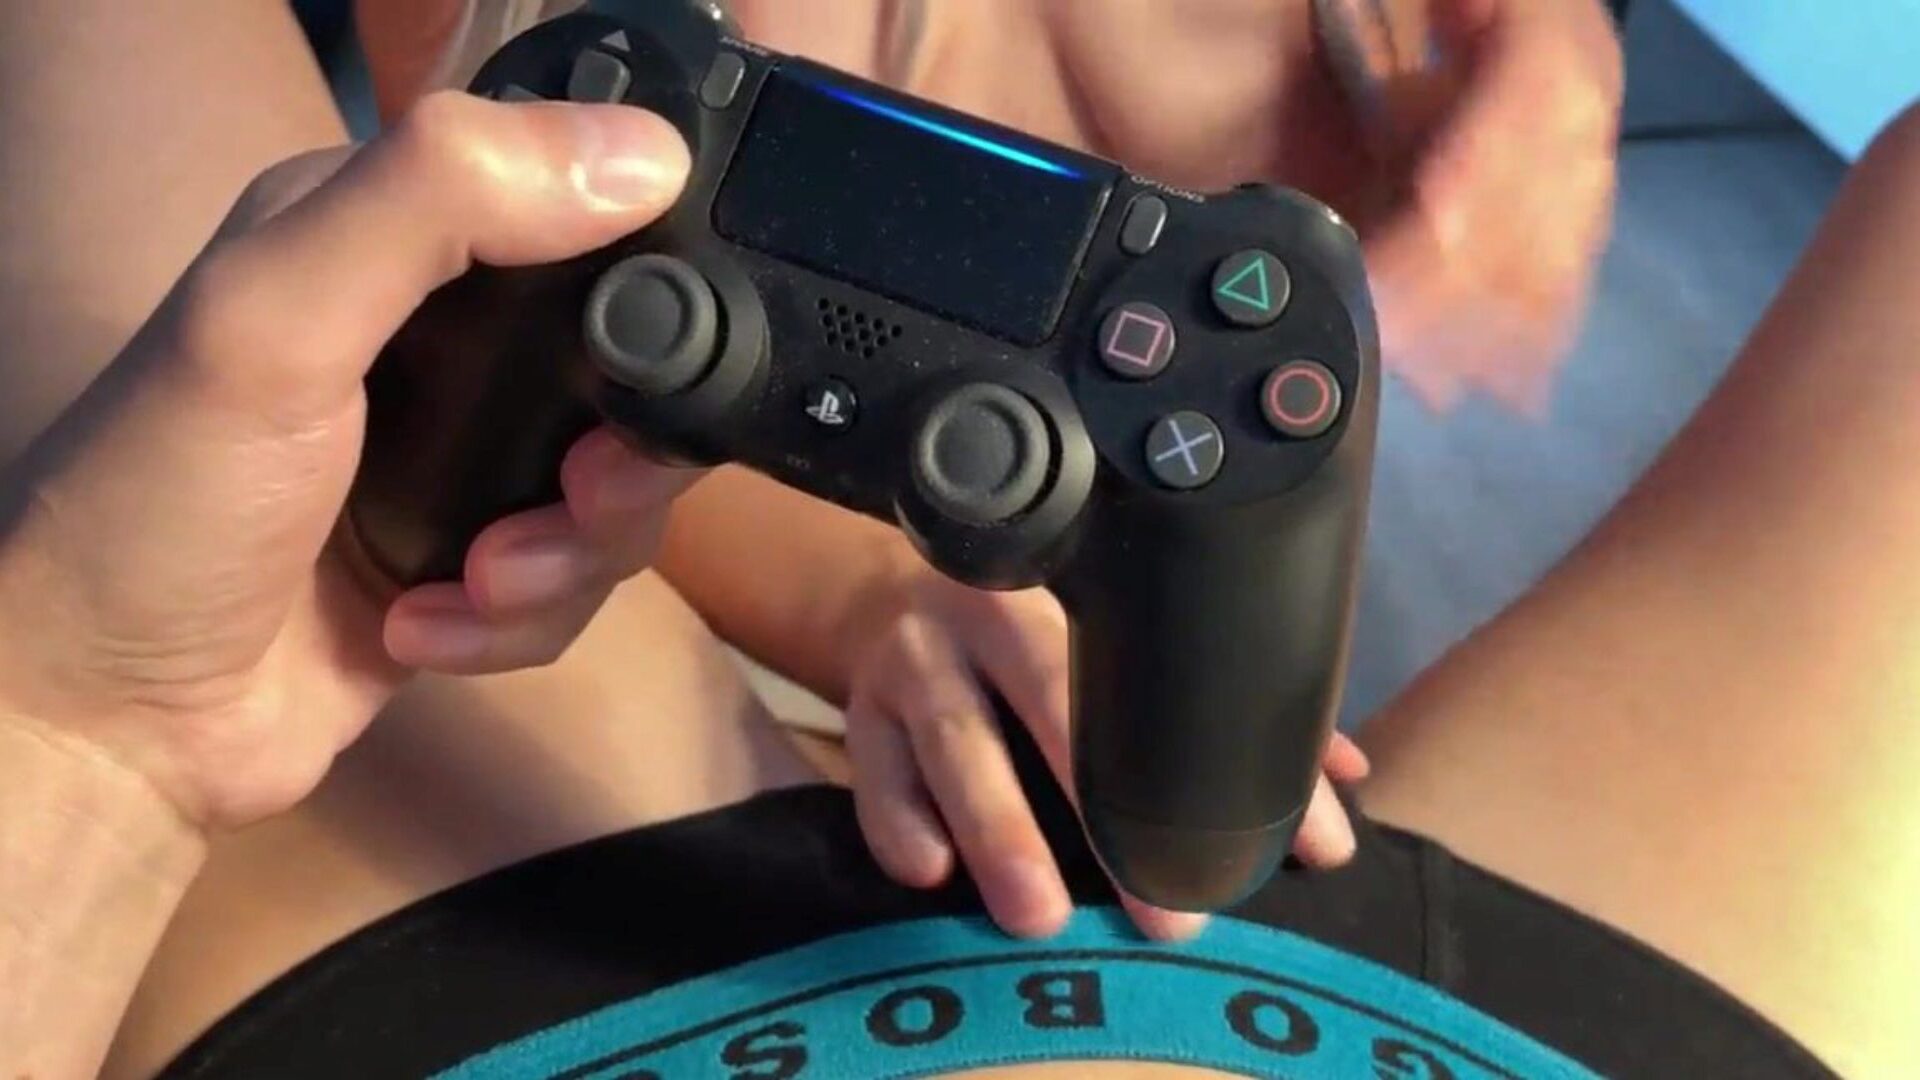 Ripping StepSister's Butt With A Fat Dick For Interfering With PS4 Play